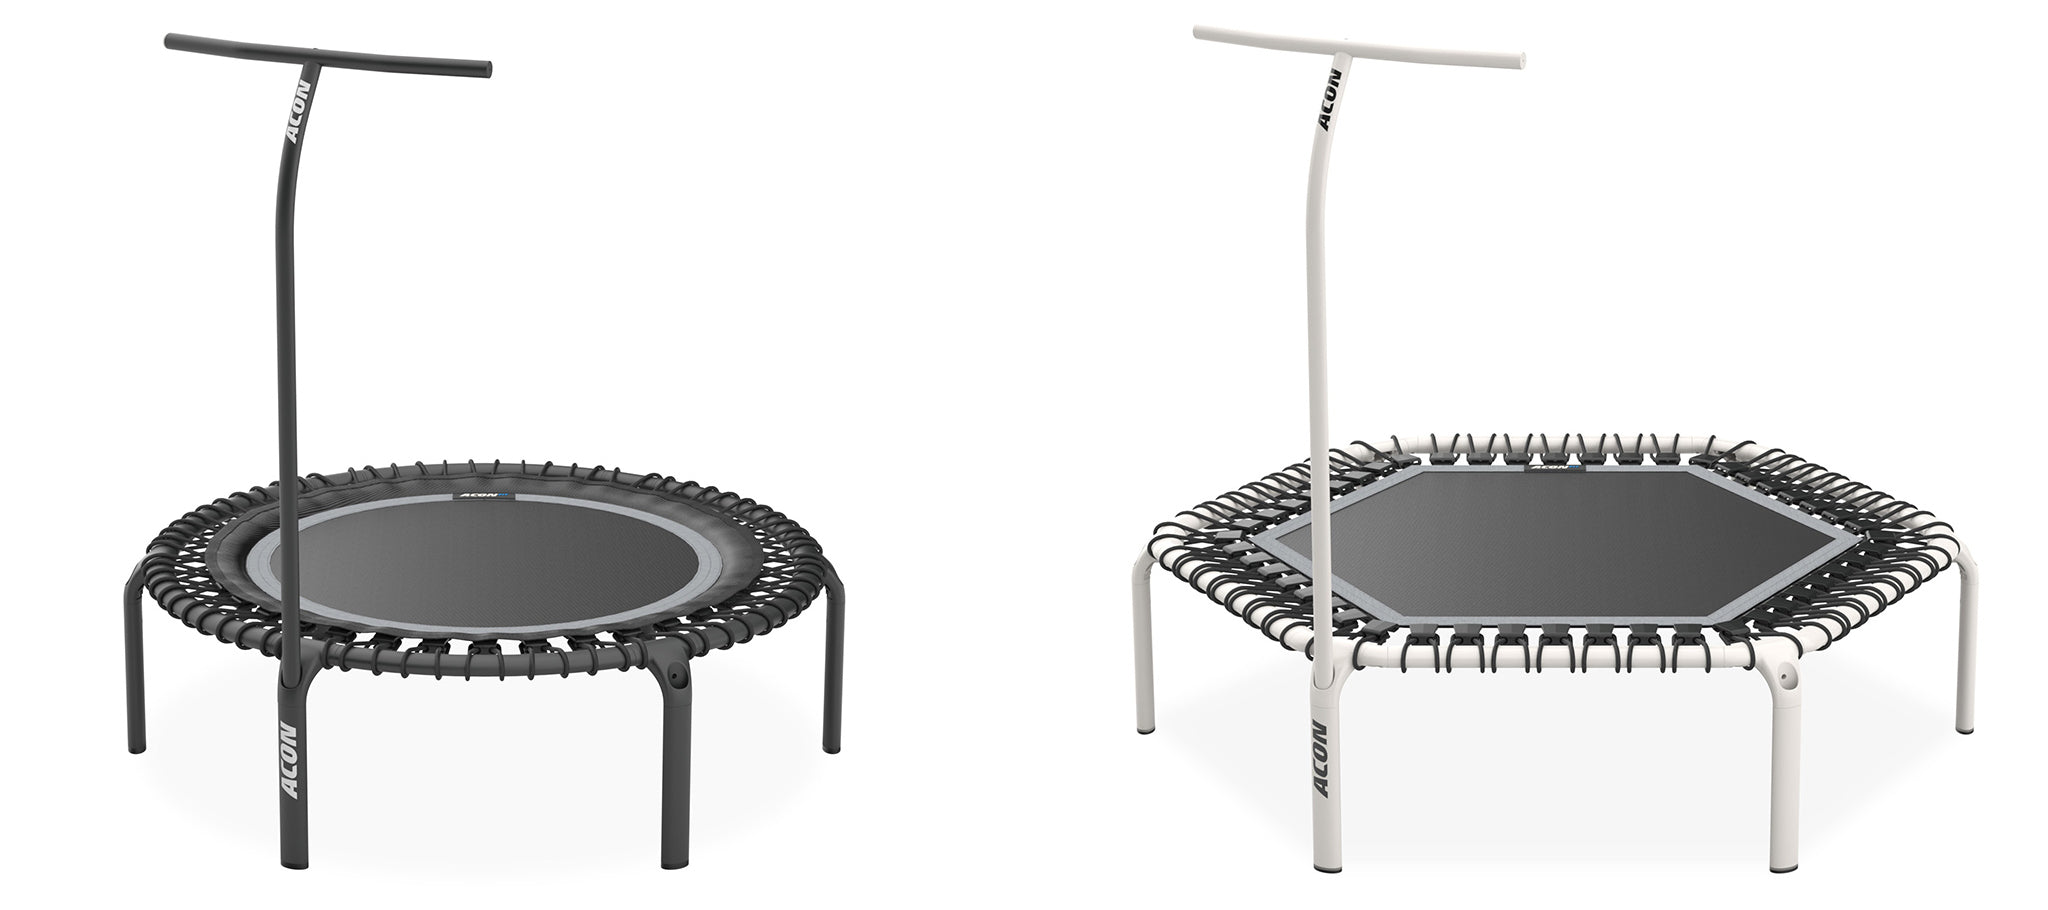 Two fitness trampolines by ACON with handle bar. The one on left is black and the one on right is white